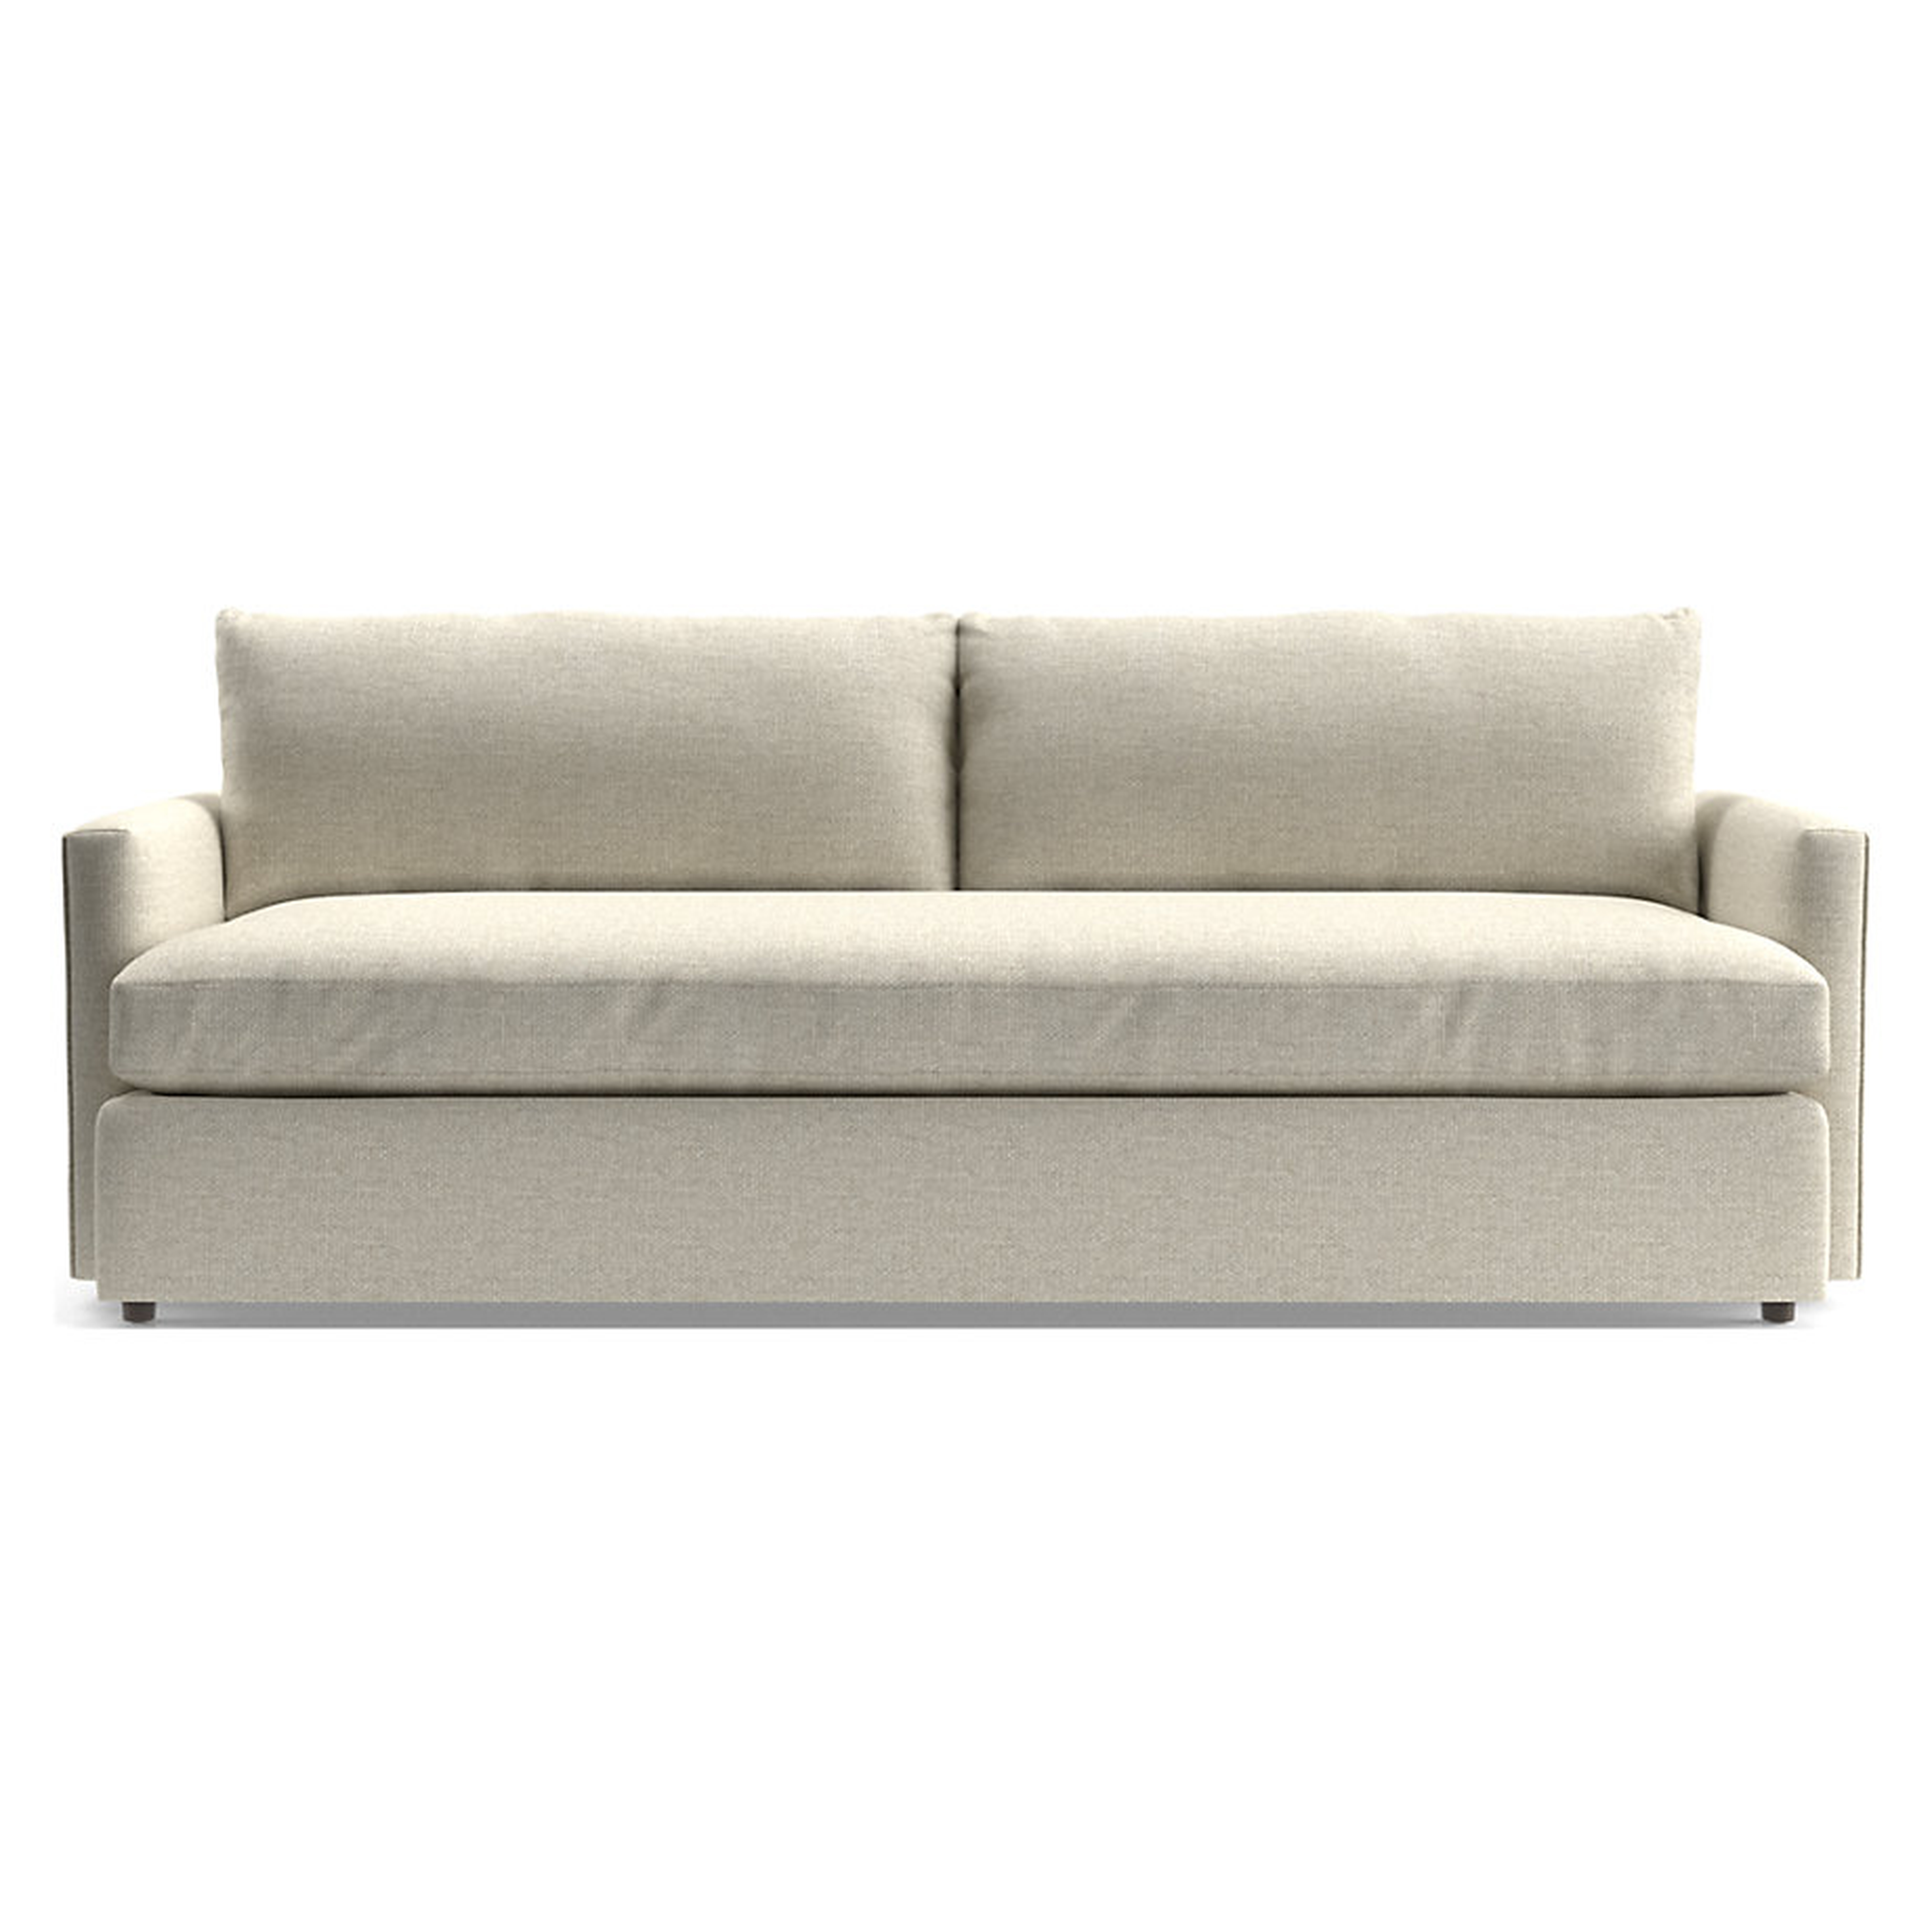 Lounge Bench Sofa 93" - Crate and Barrel